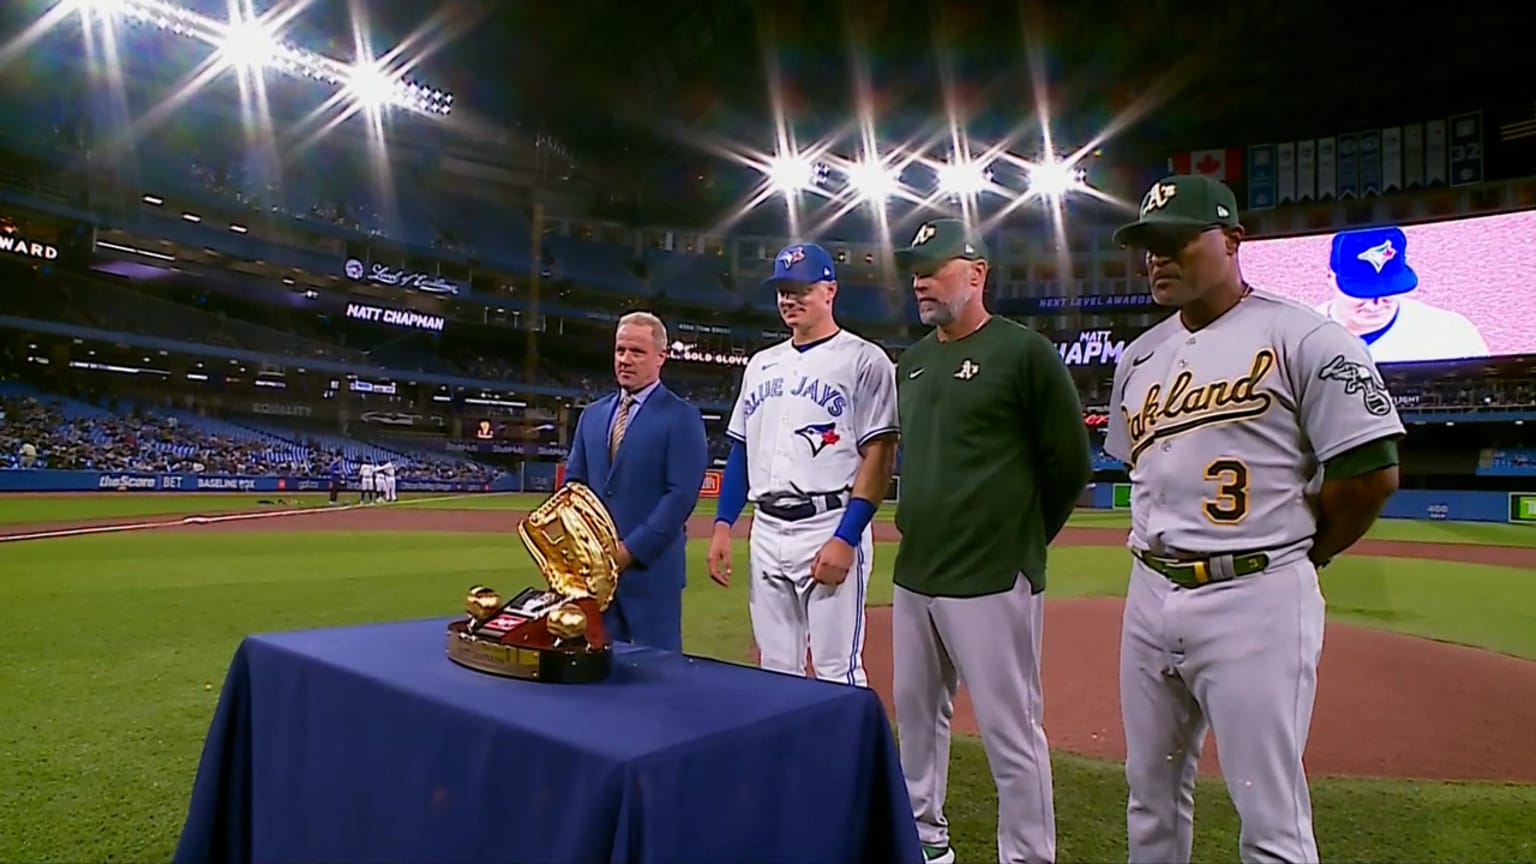 Blue Jays' Matt Chapman came up just shy of another Gold Glove